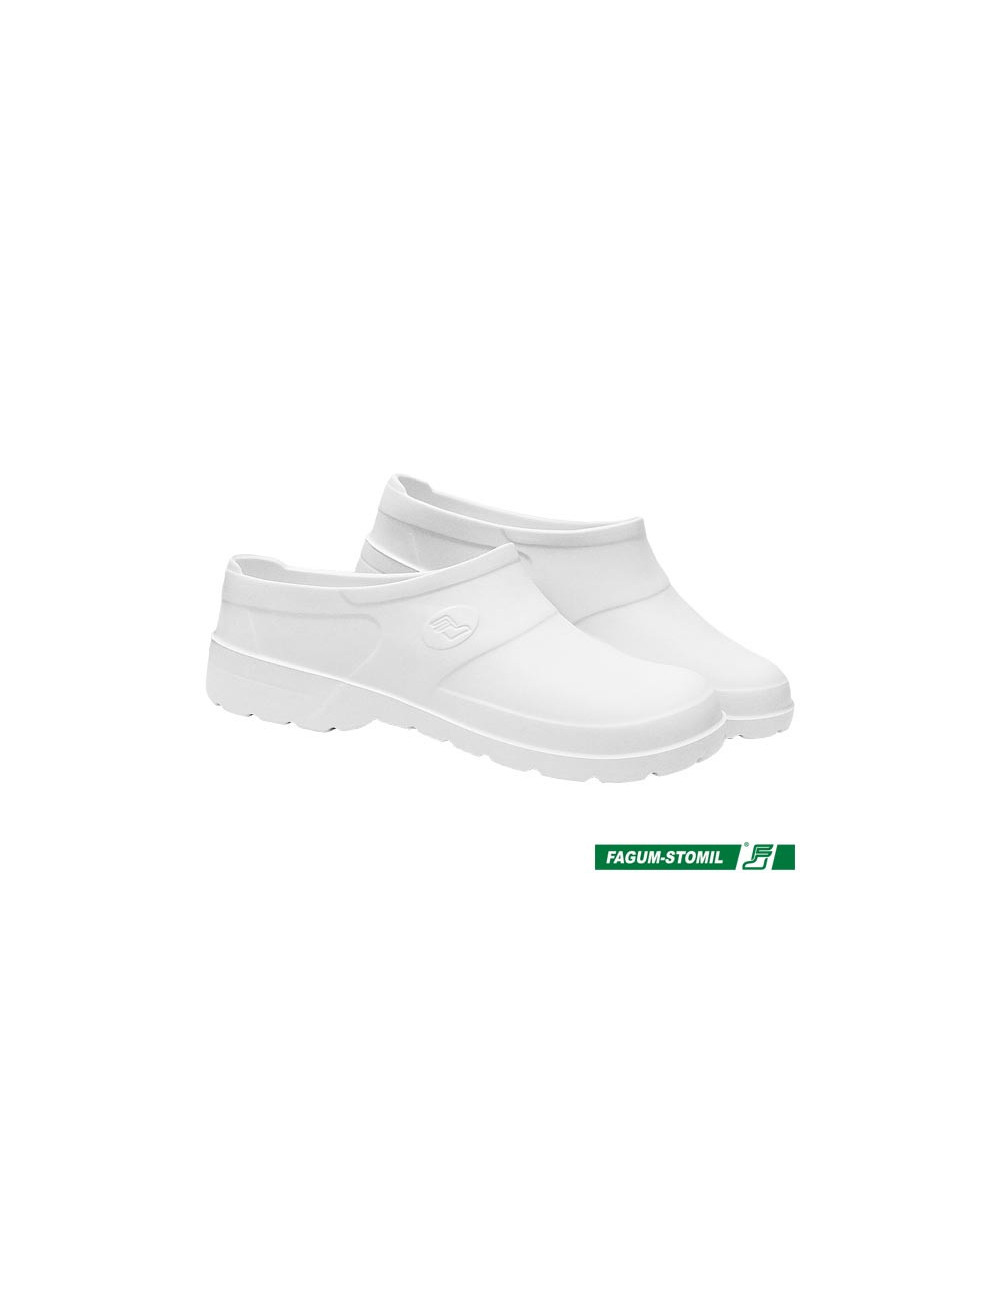 Bfamarom slippers in white Fagum-stomil